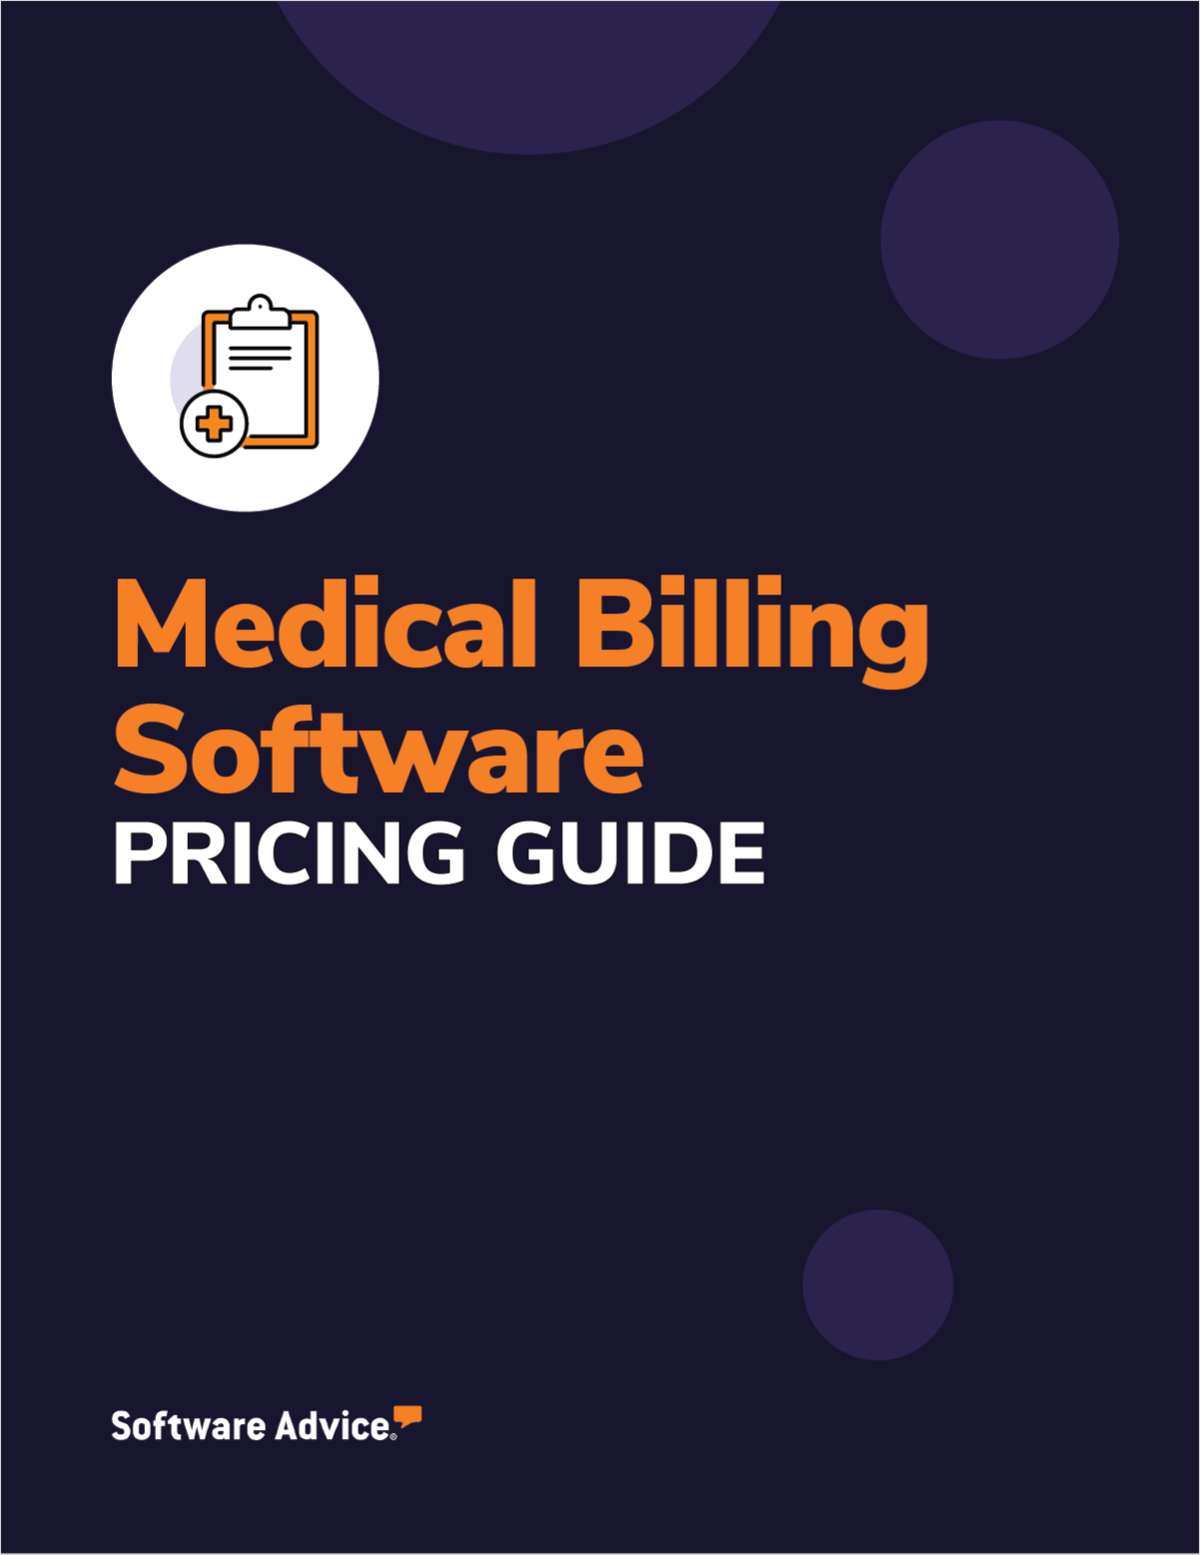 New for 2023: Medical Billing Software Pricing Guide